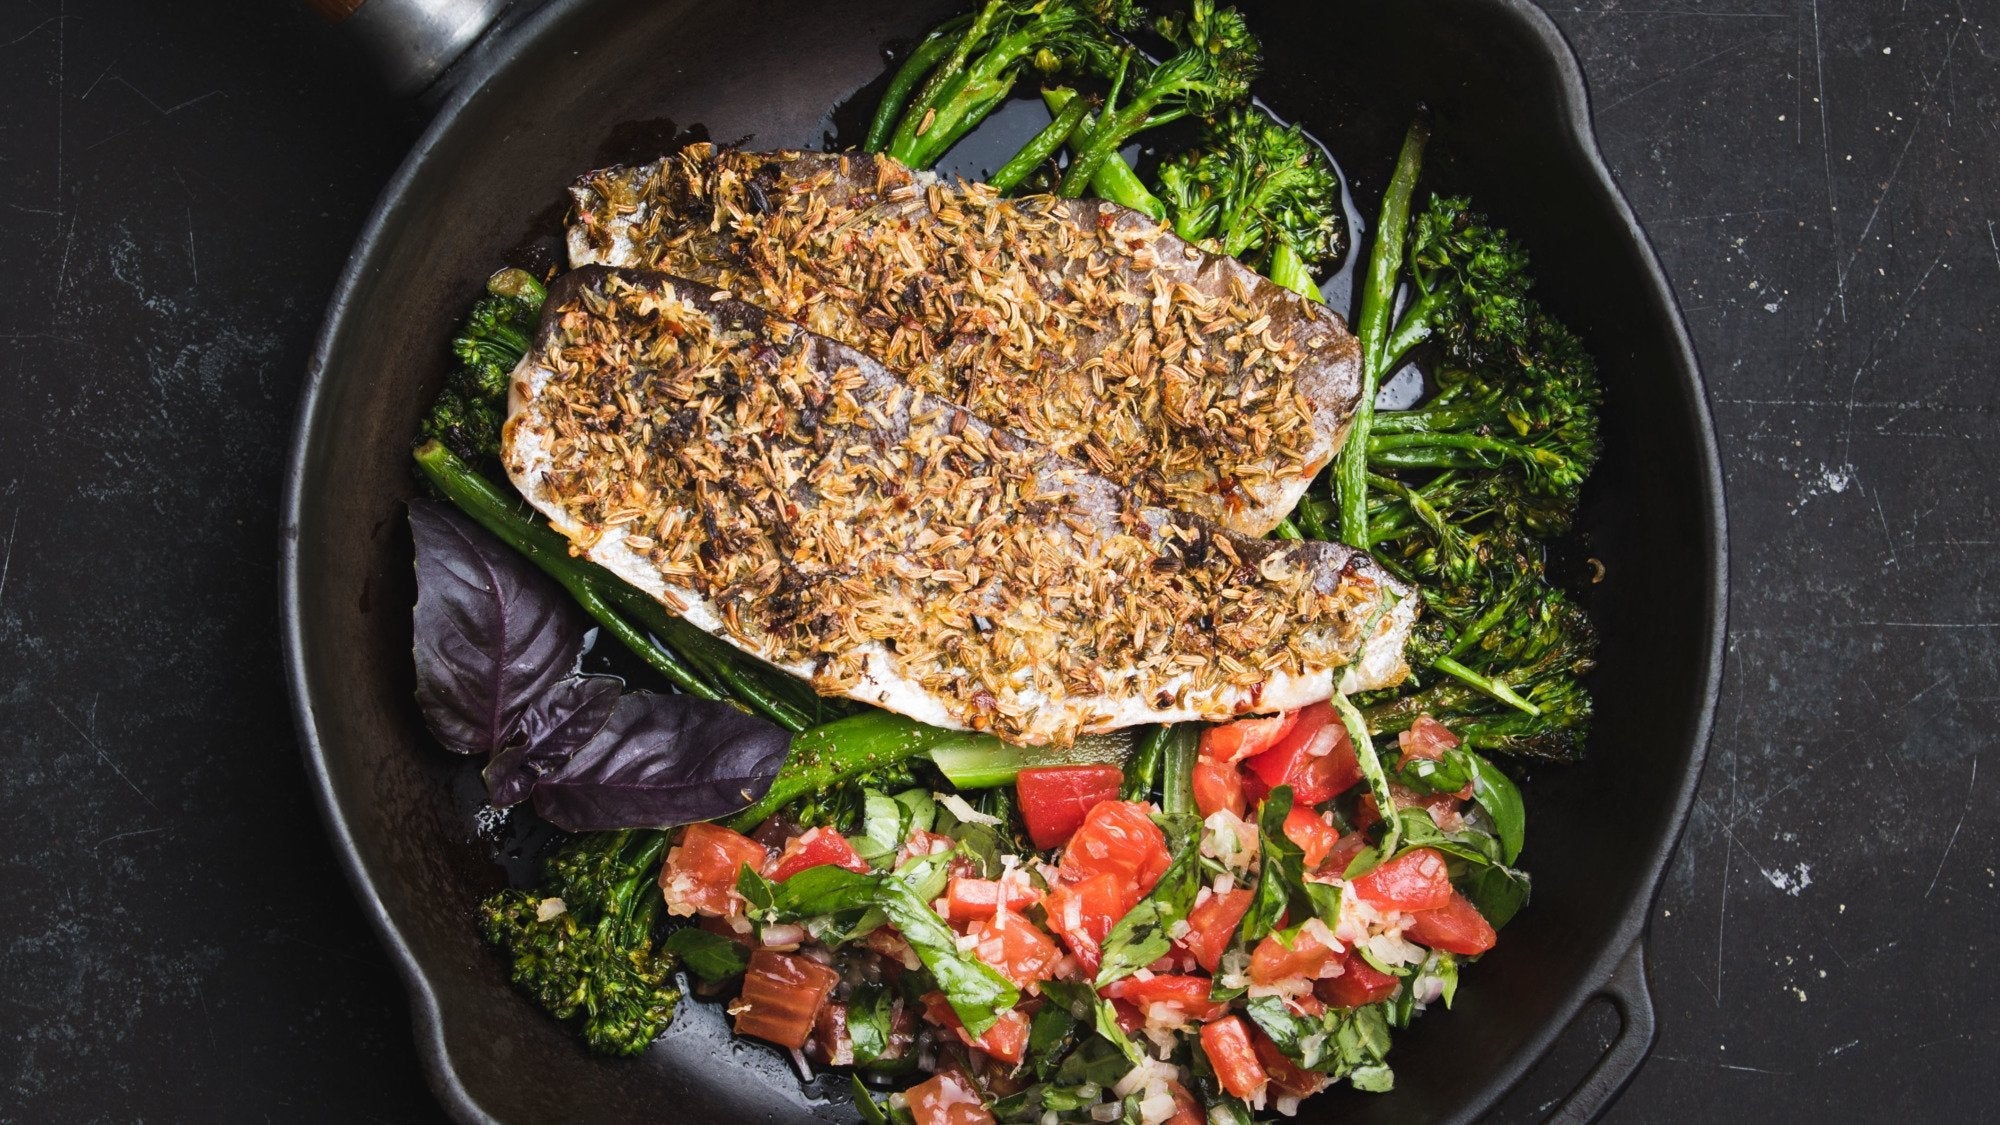 Spiced Trout with Roasted Broccoli and Tomato Dressing Recipe - Gozney